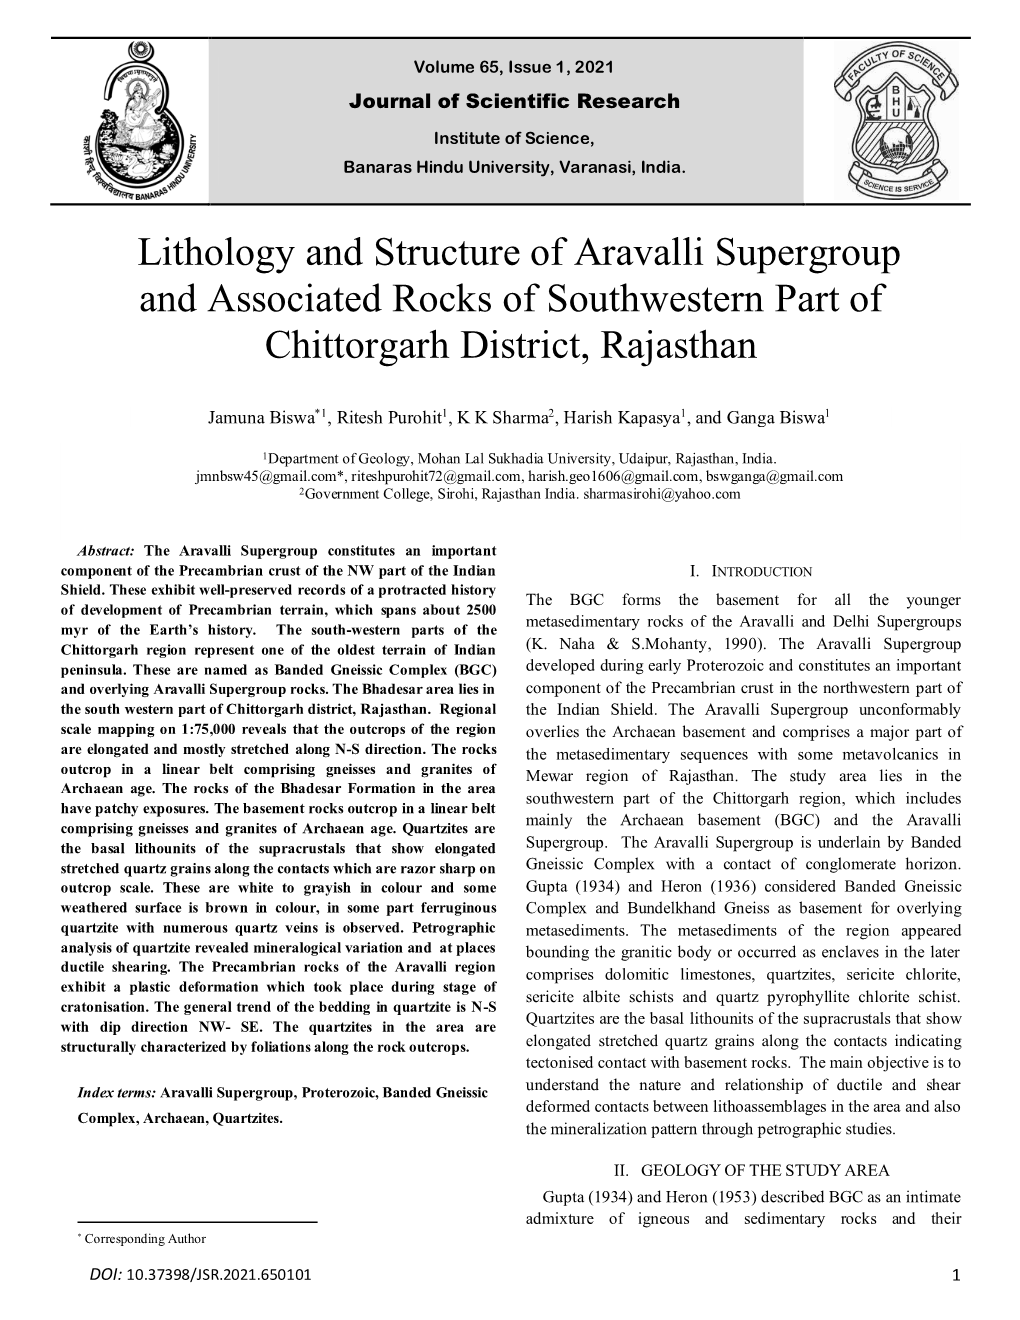 Lithology and Structure of Aravalli Supergroup and Associated Rocks of Southwestern Part of Chittorgarh District, Rajasthan